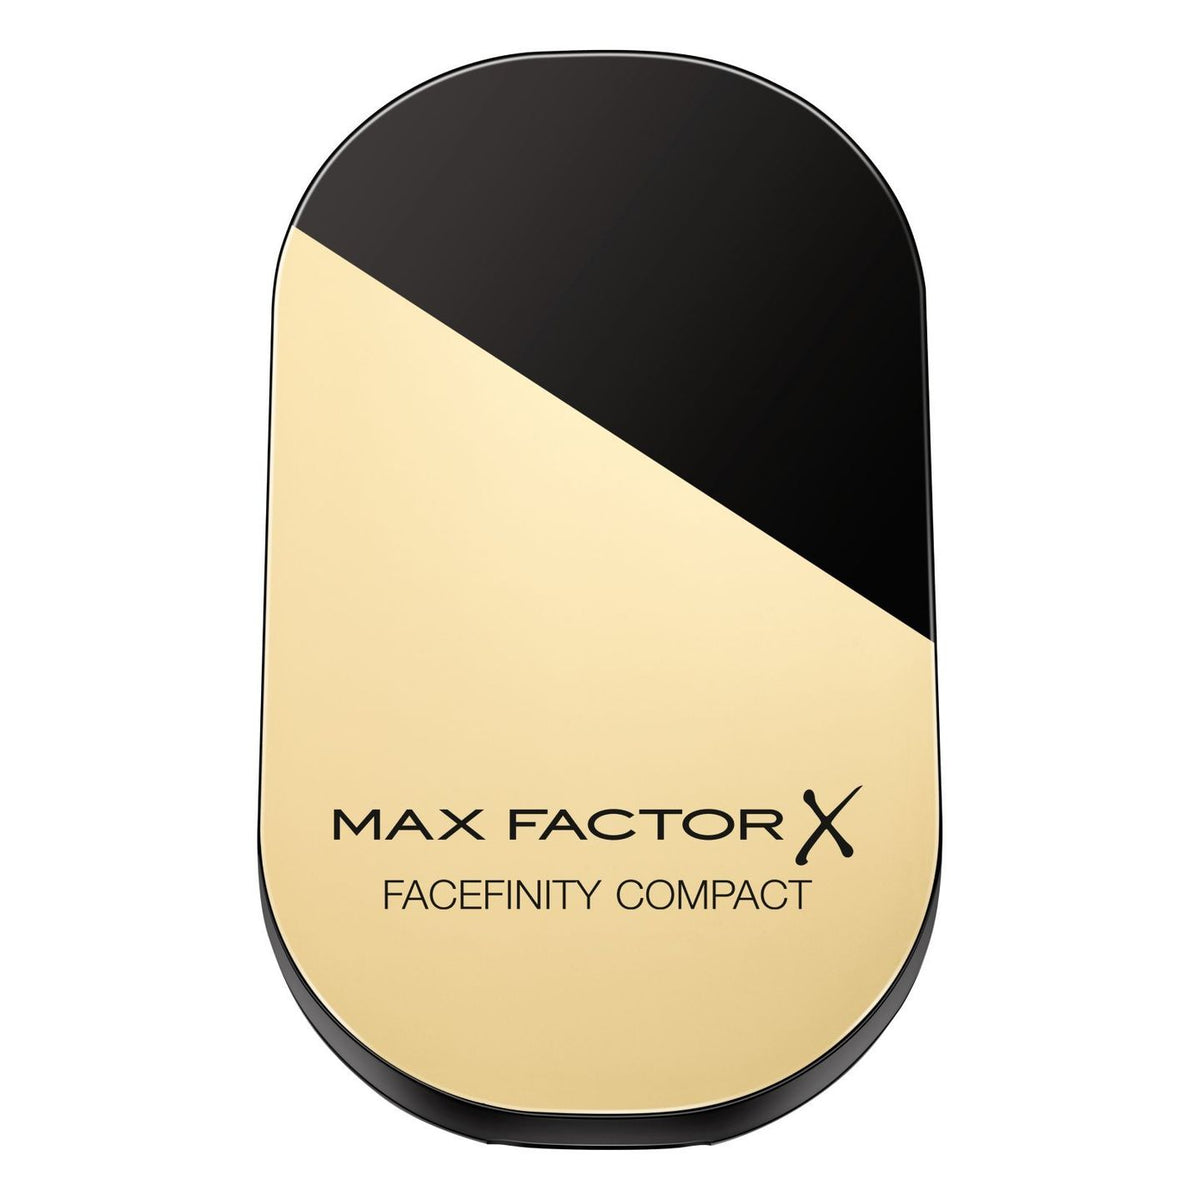 Max Factor Face Finity Compact Foundation 001 Porcelain